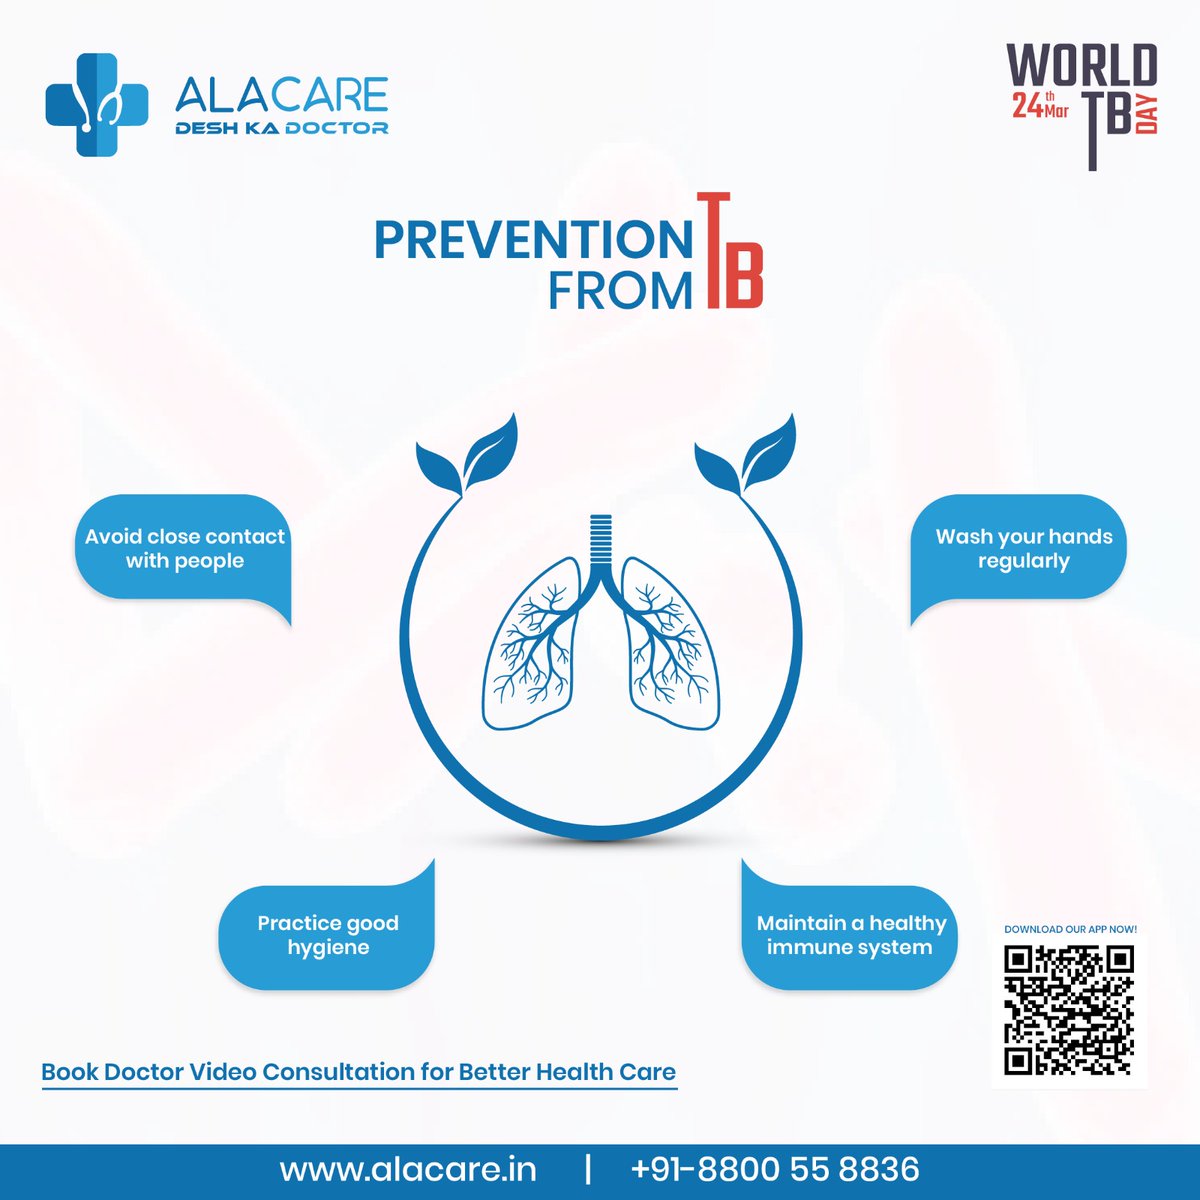 Tuberculosis (TB) is a Serious Infectious Disease Caused by a Bacterium that Primarily Affects the Lungs. Consult with Our Expert Doctors for Better Treatment.
#WorldTBDay #deshkadoctor #alacare #WorldTuberculosisDay #Tuberculosis #Bacteria  #startup #Awareness #healthcare